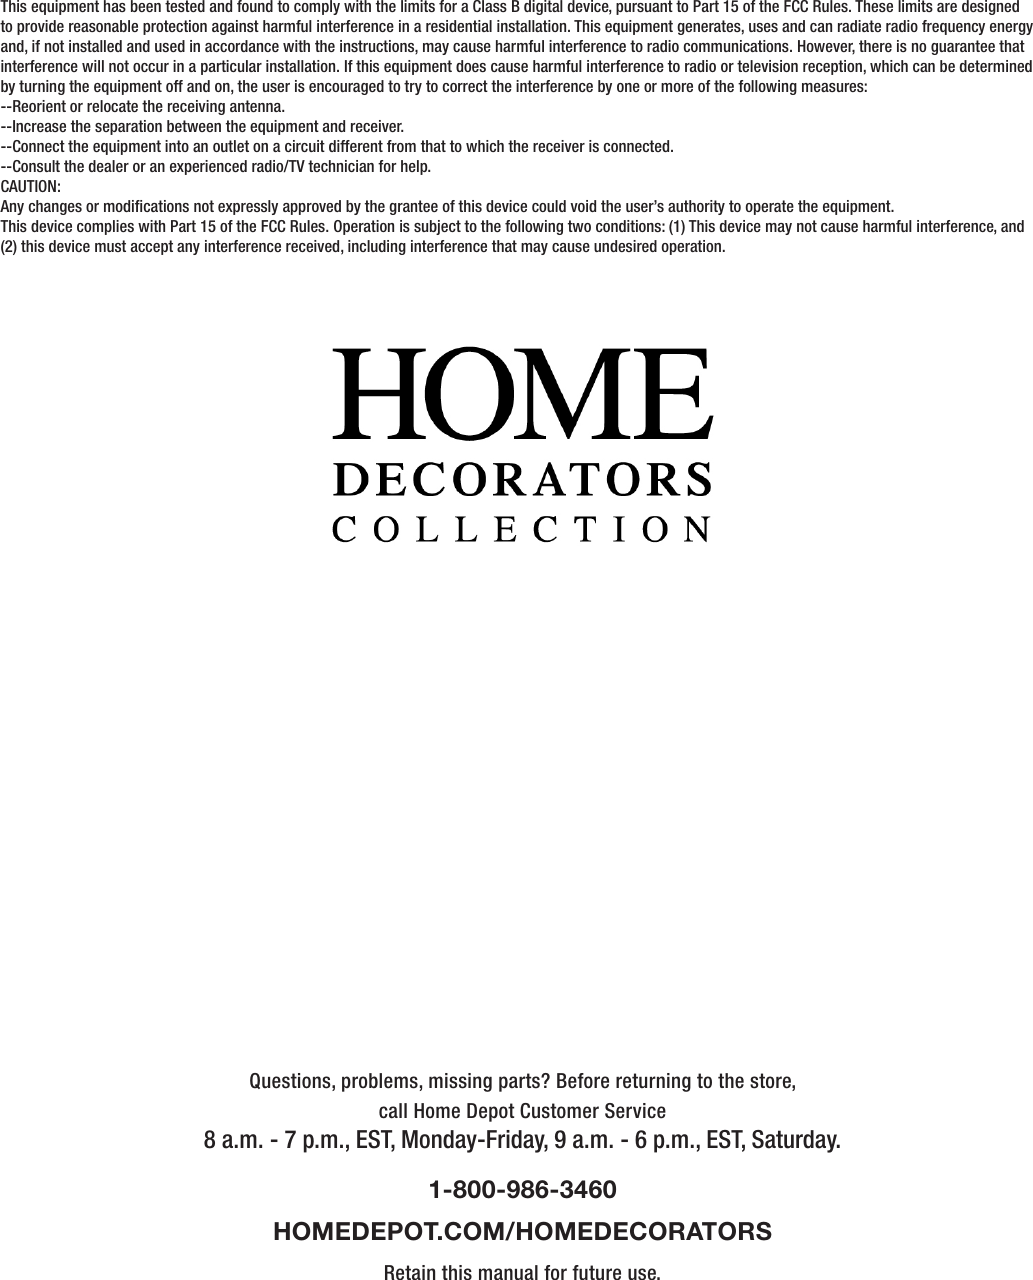 Questions, problems, missing parts? Before returning to the store,call Home Depot Customer Service8 a.m. - 7 p.m., EST, Monday-Friday, 9 a.m. - 6 p.m., EST, Saturday.1-800-986-3460HOMEDEPOT.COM/HOMEDECORATORSRetain this manual for future use.This equipment has been tested and found to comply with the limits for a Class B digital device, pursuant to Part 15 of the FCC Rules. These limits are designed to provide reasonable protection against harmful interference in a residential installation. This equipment generates, uses and can radiate radio frequency energy and, if not installed and used in accordance with the instructions, may cause harmful interference to radio communications. However, there is no guarantee that interference will not occur in a particular installation. If this equipment does cause harmful interference to radio or television reception, which can be determined by turning the equipment off and on, the user is encouraged to try to correct the interference by one or more of the following measures:--Reorient or relocate the receiving antenna.--Increase the separation between the equipment and receiver.--Connect the equipment into an outlet on a circuit different from that to which the receiver is connected.--Consult the dealer or an experienced radio/TV technician for help.CAUTION:Any changes or modications not expressly approved by the grantee of this device could void the user’s authority to operate the equipment.This device complies with Part 15 of the FCC Rules. Operation is subject to the following two conditions: (1) This device may not cause harmful interference, and (2) this device must accept any interference received, including interference that may cause undesired operation.      